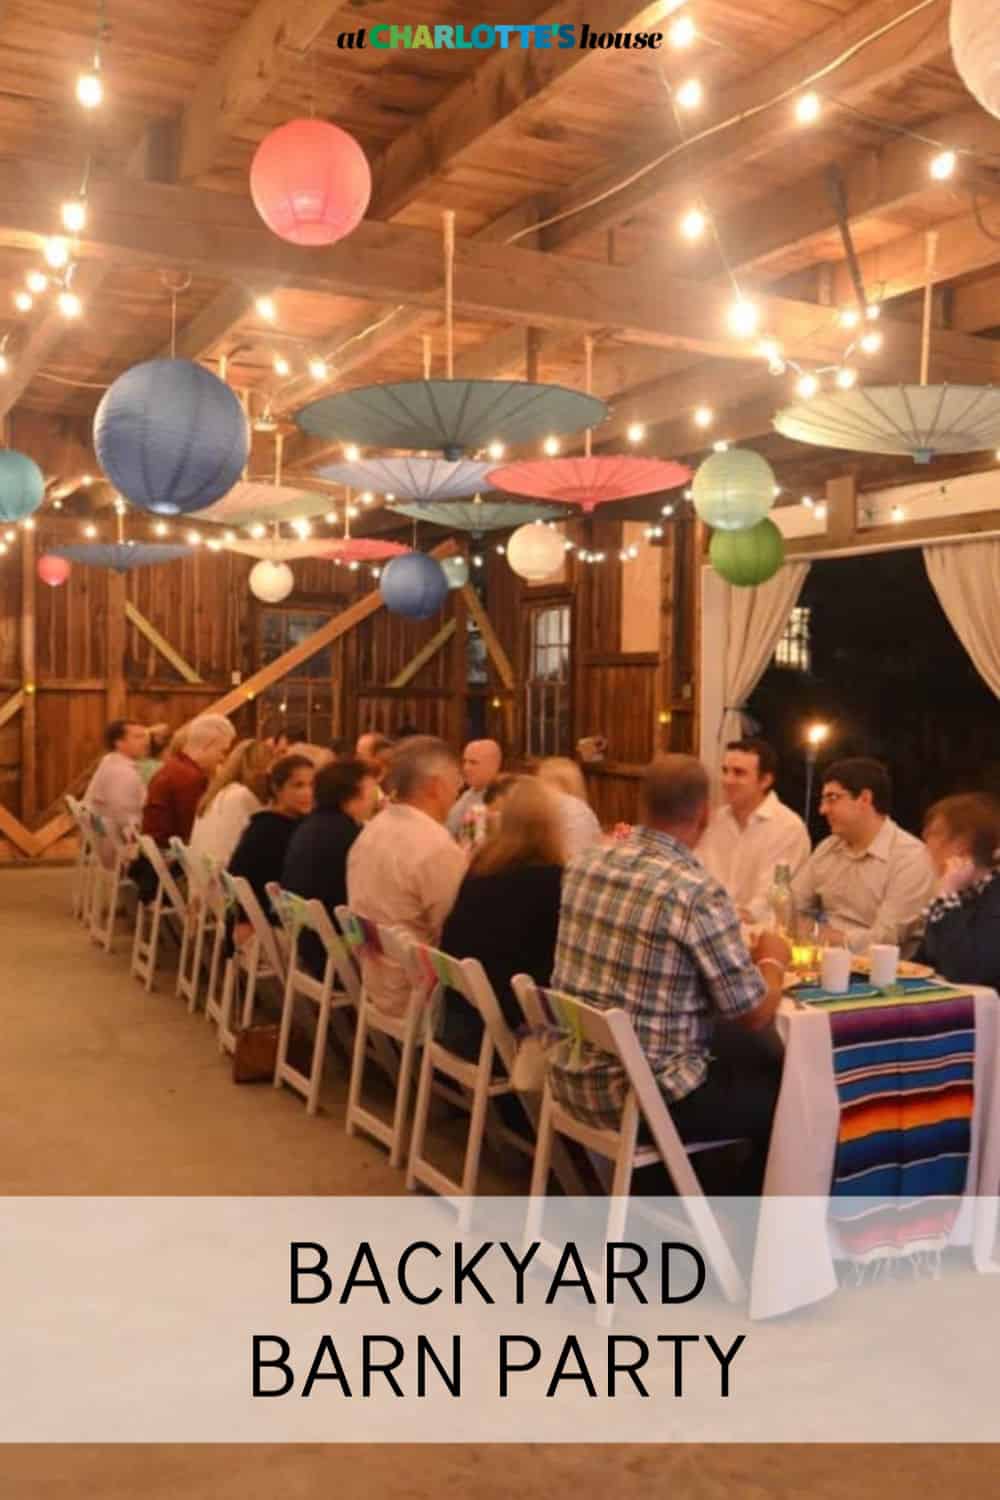 Our Colorful and Rustic Barn Party At Charlotte's House